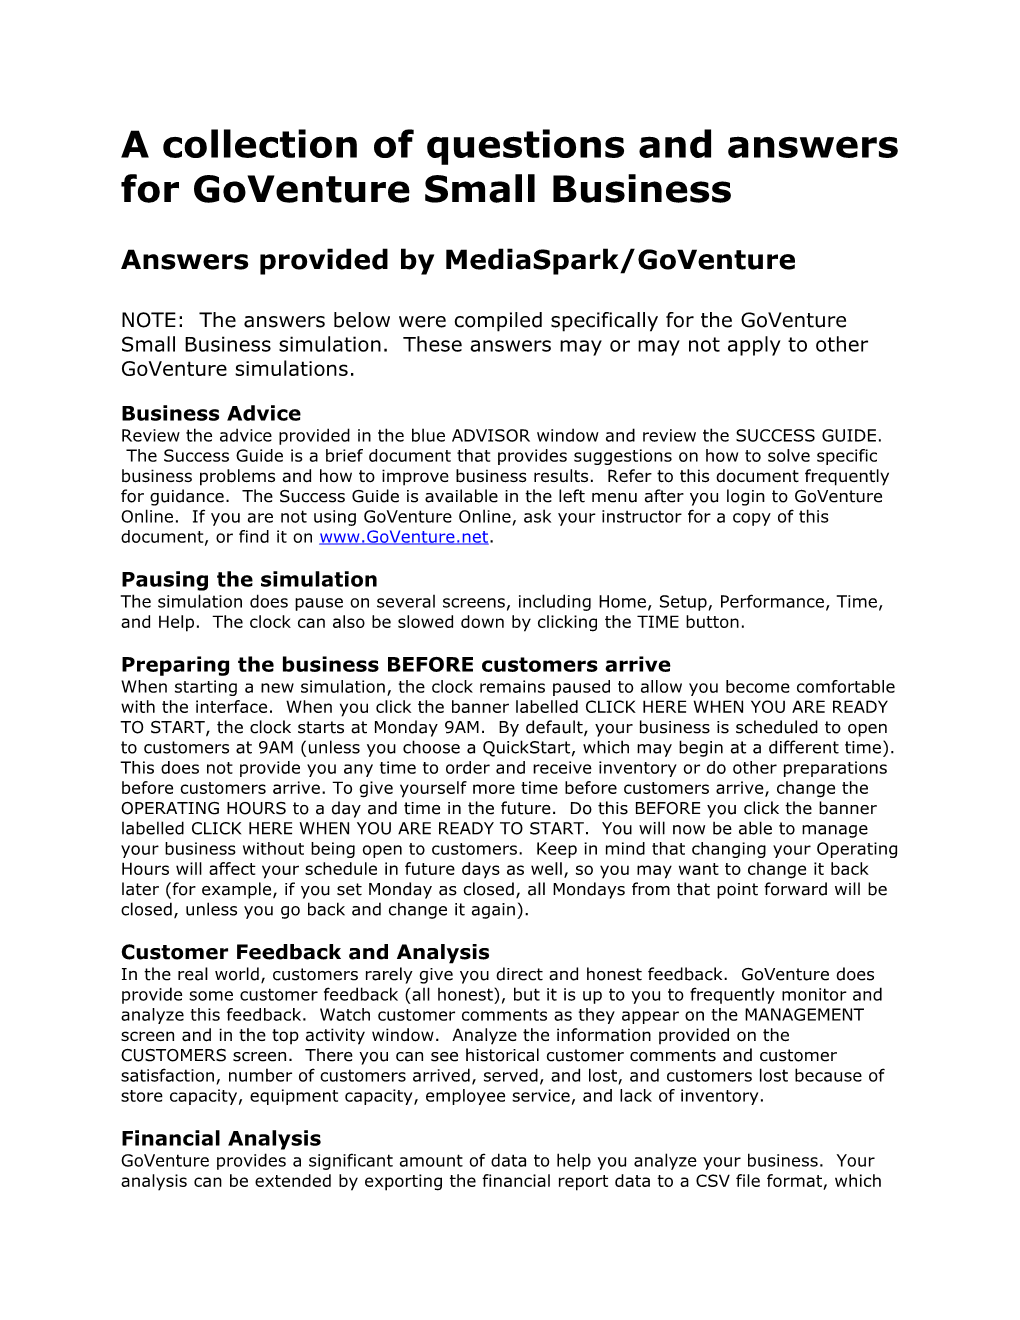 A Collection of Questions and Answers for Goventure Small Business